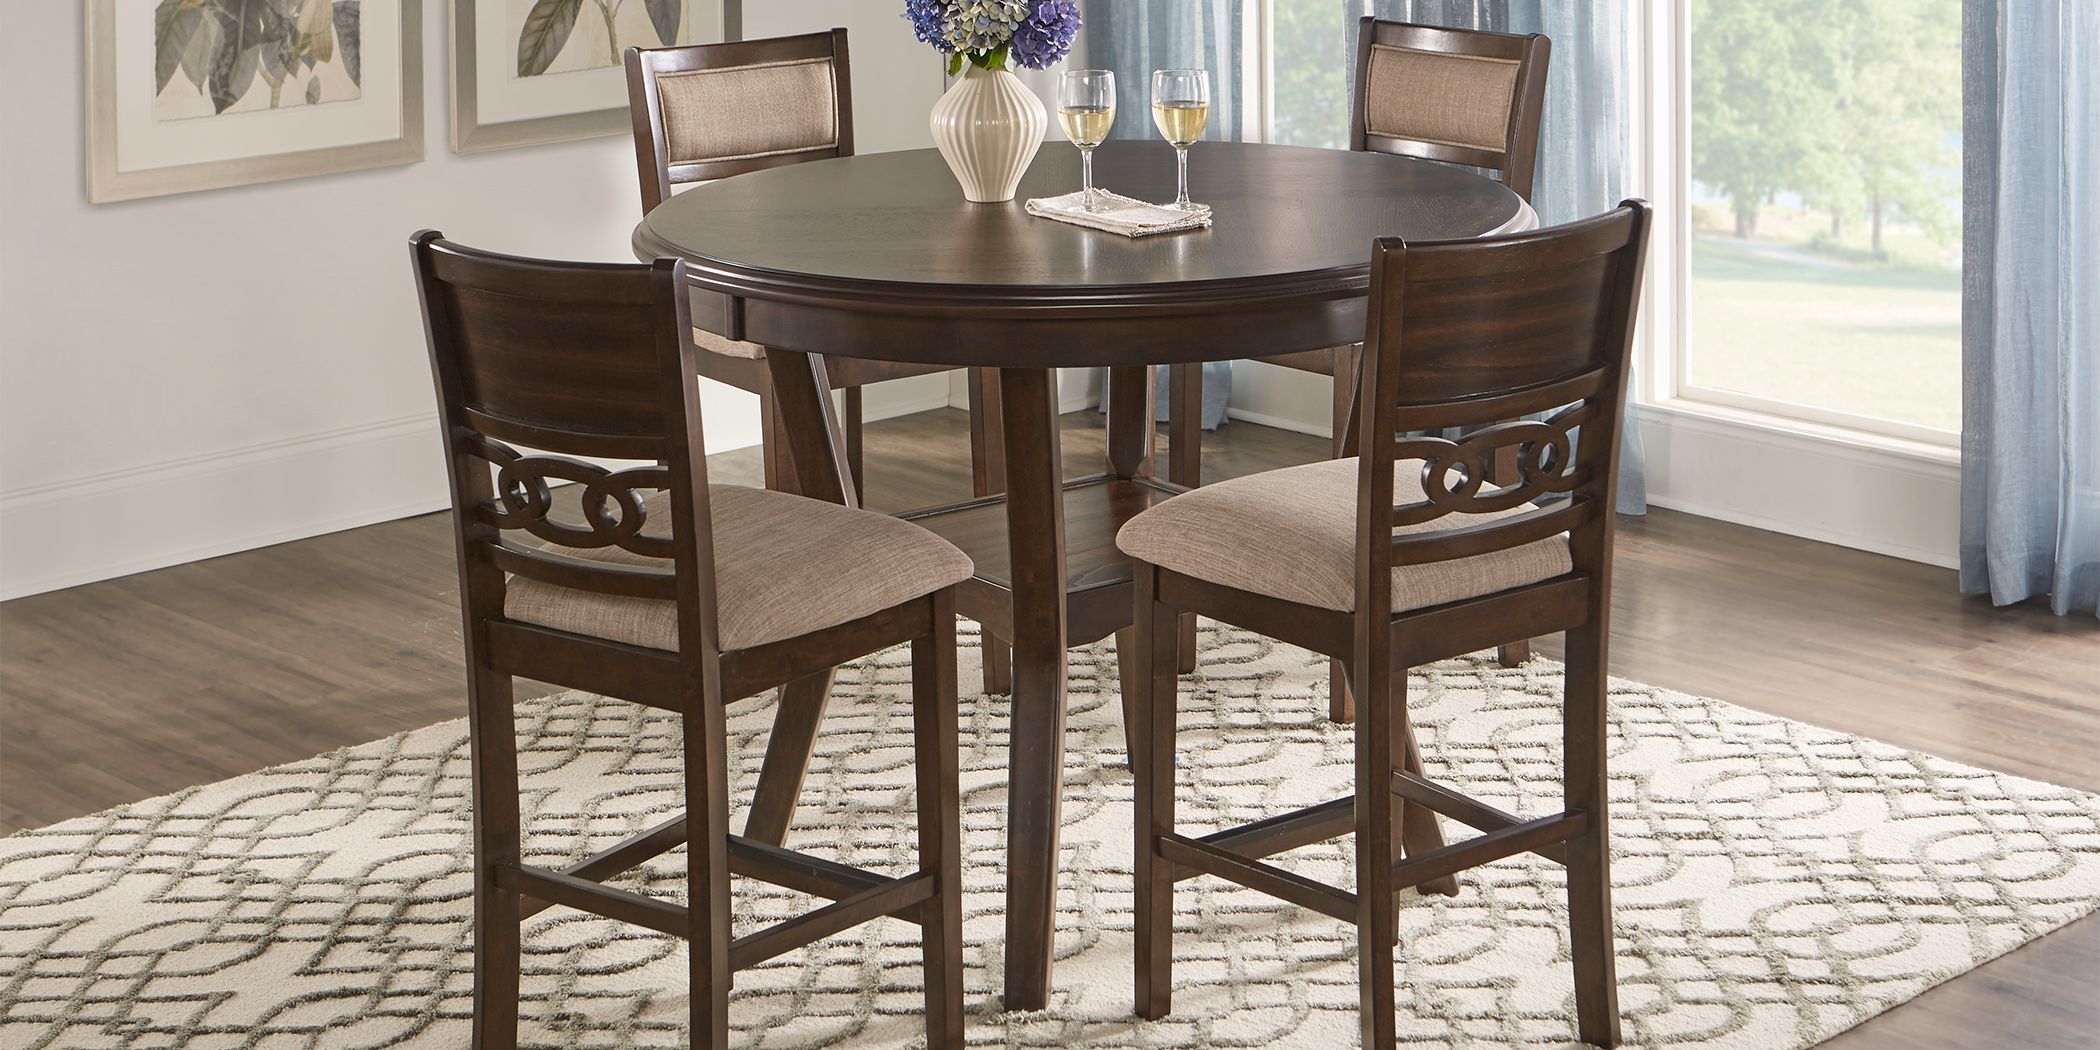 Brookgate Brown Cherry 5 Pc Round Counter Height Dining Set Rooms To Go